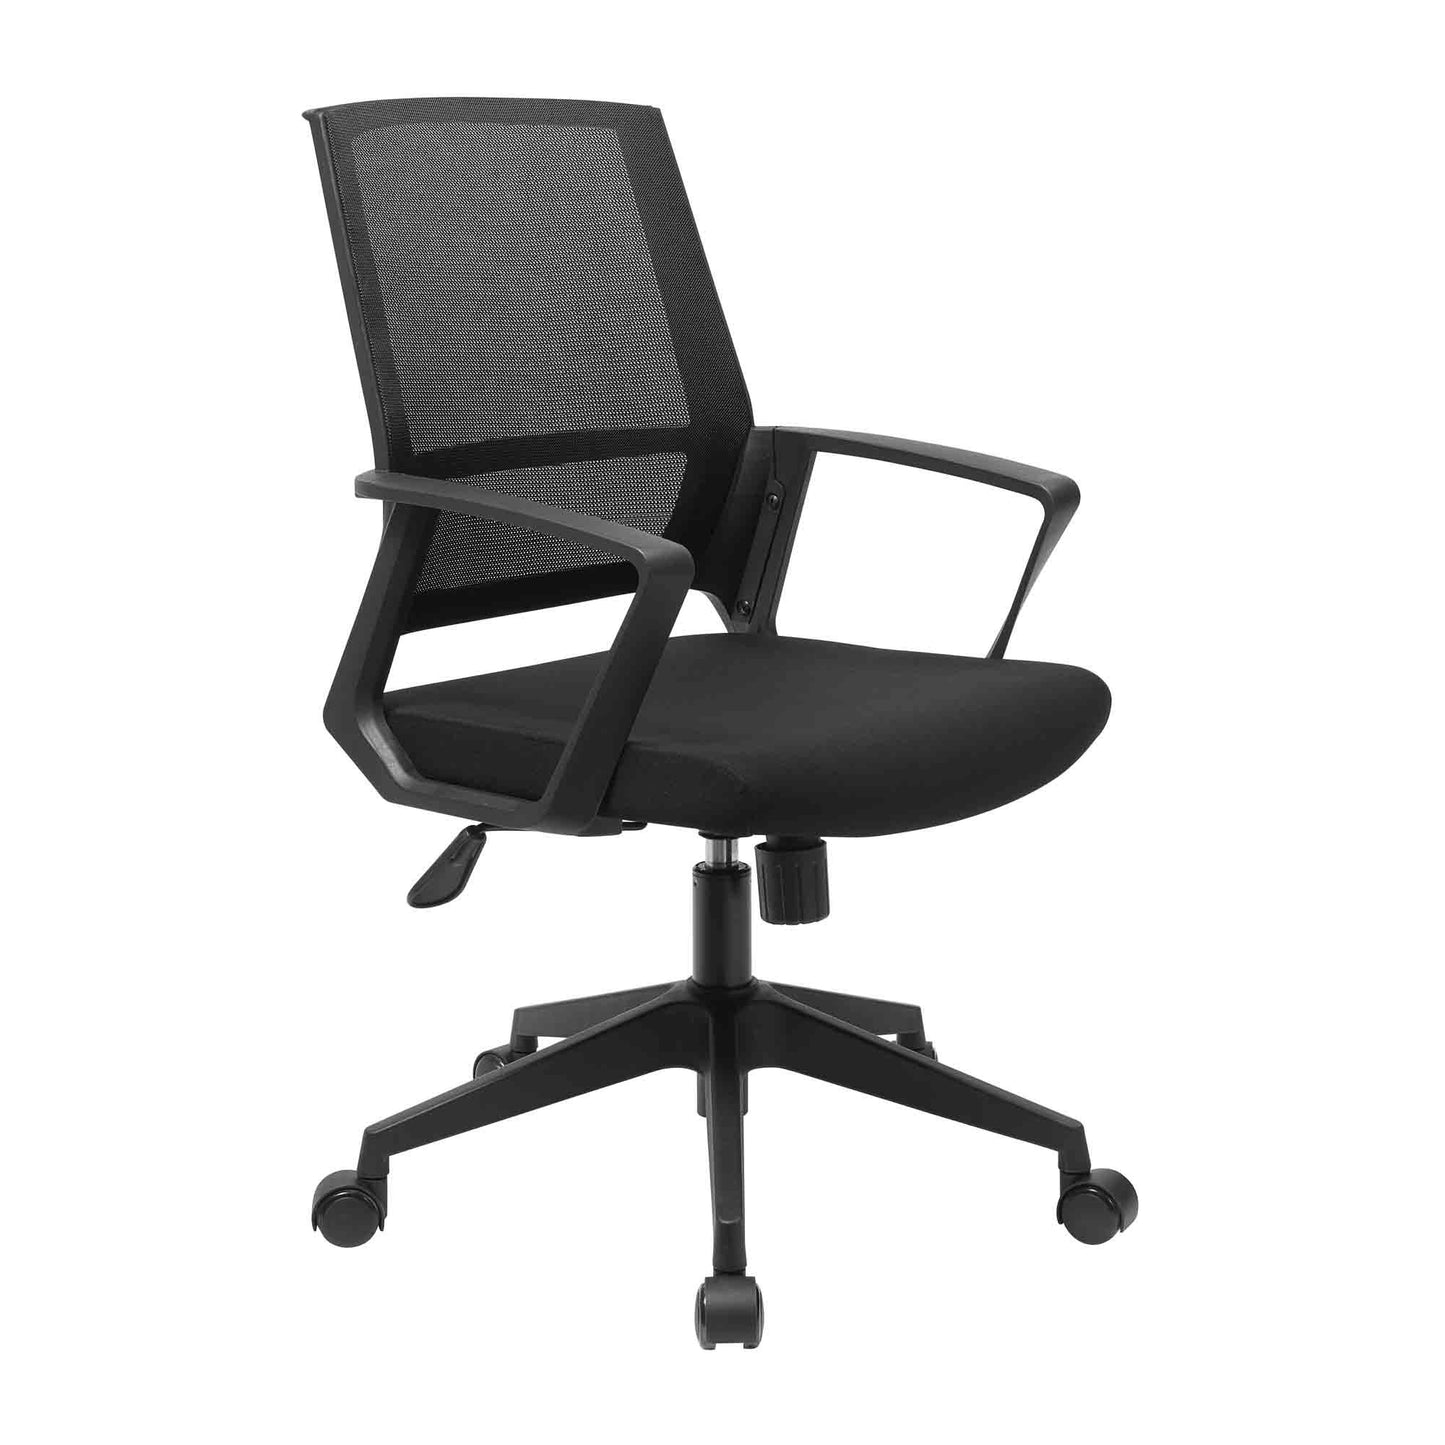 Office Chair - mch0017